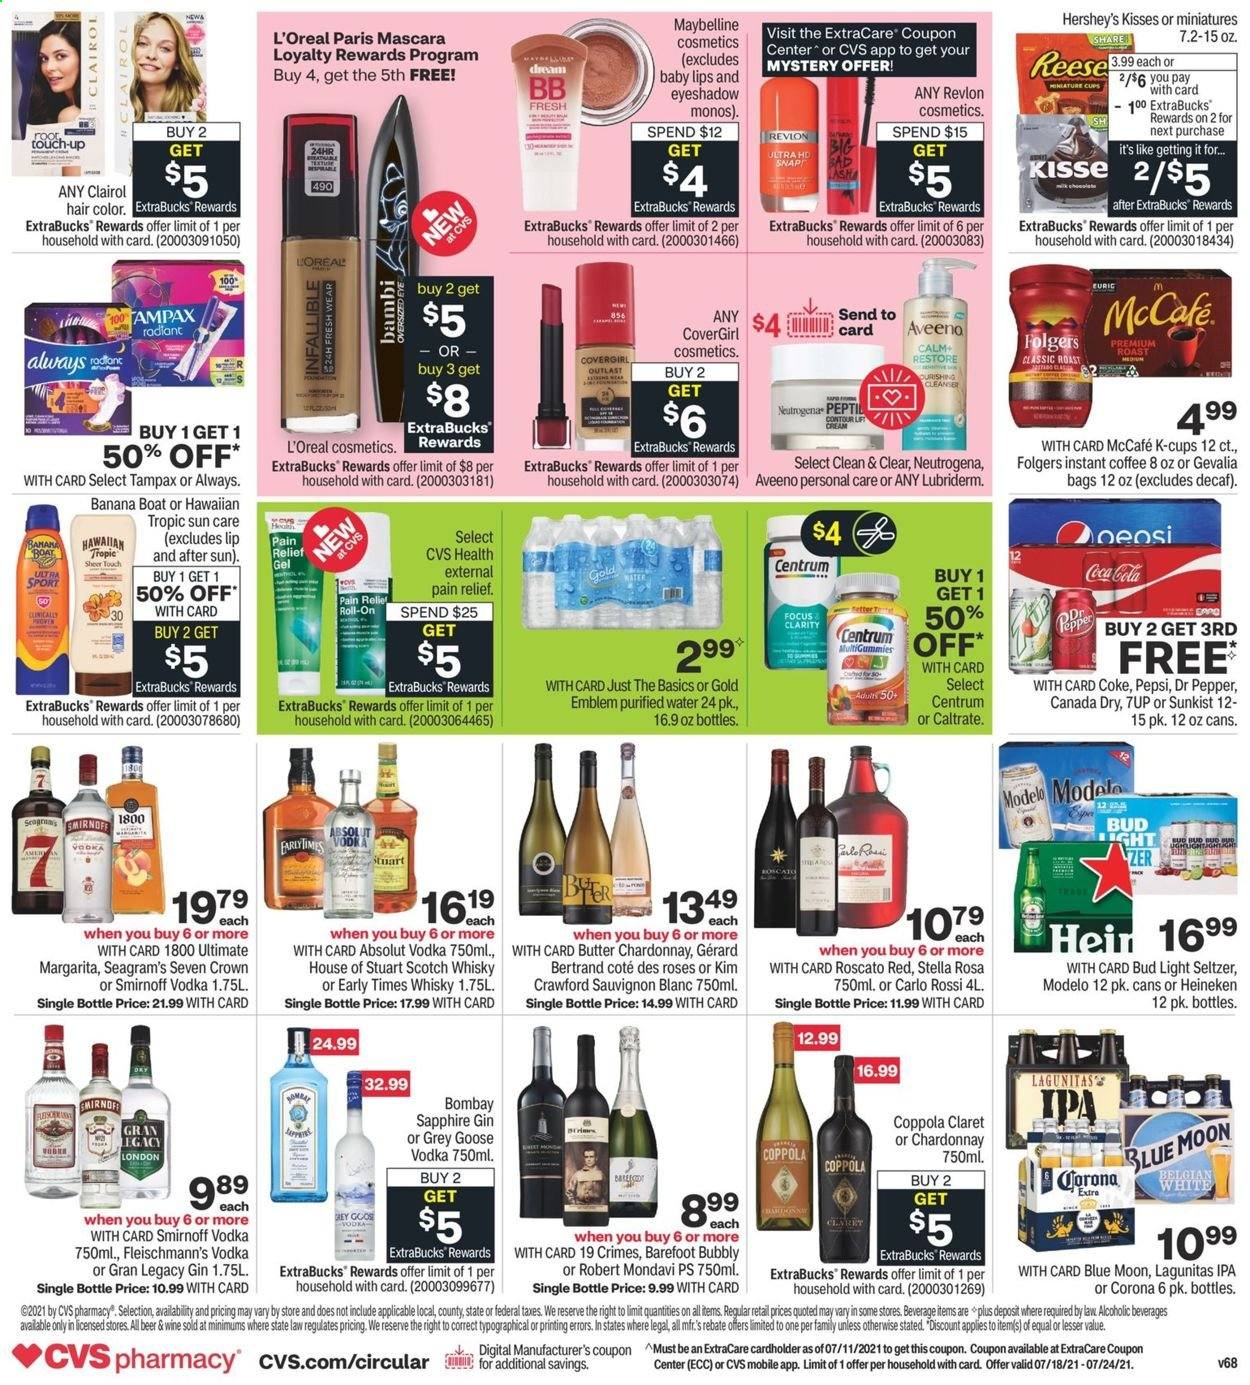 thumbnail - CVS Pharmacy Flyer - 07/18/2021 - 07/24/2021 - Sales products - Hershey's, Canada Dry, Coca-Cola, Pepsi, Dr. Pepper, 7UP, purified water, instant coffee, Folgers, coffee capsules, McCafe, K-Cups, Gevalia, white wine, Chardonnay, Sauvignon Blanc, gin, Smirnoff, vodka, Absolut, Hard Seltzer, scotch whisky, whisky, Aveeno, Tampax, L’Oréal, Neutrogena, Clairol, Revlon, hair color, Lubriderm, mascara, Maybelline, roll-on, pain relief, Centrum, beer, Blue Moon, Bud Light, Corona Extra, Heineken, IPA, Modelo, eyeshadow, contour. Page 2.